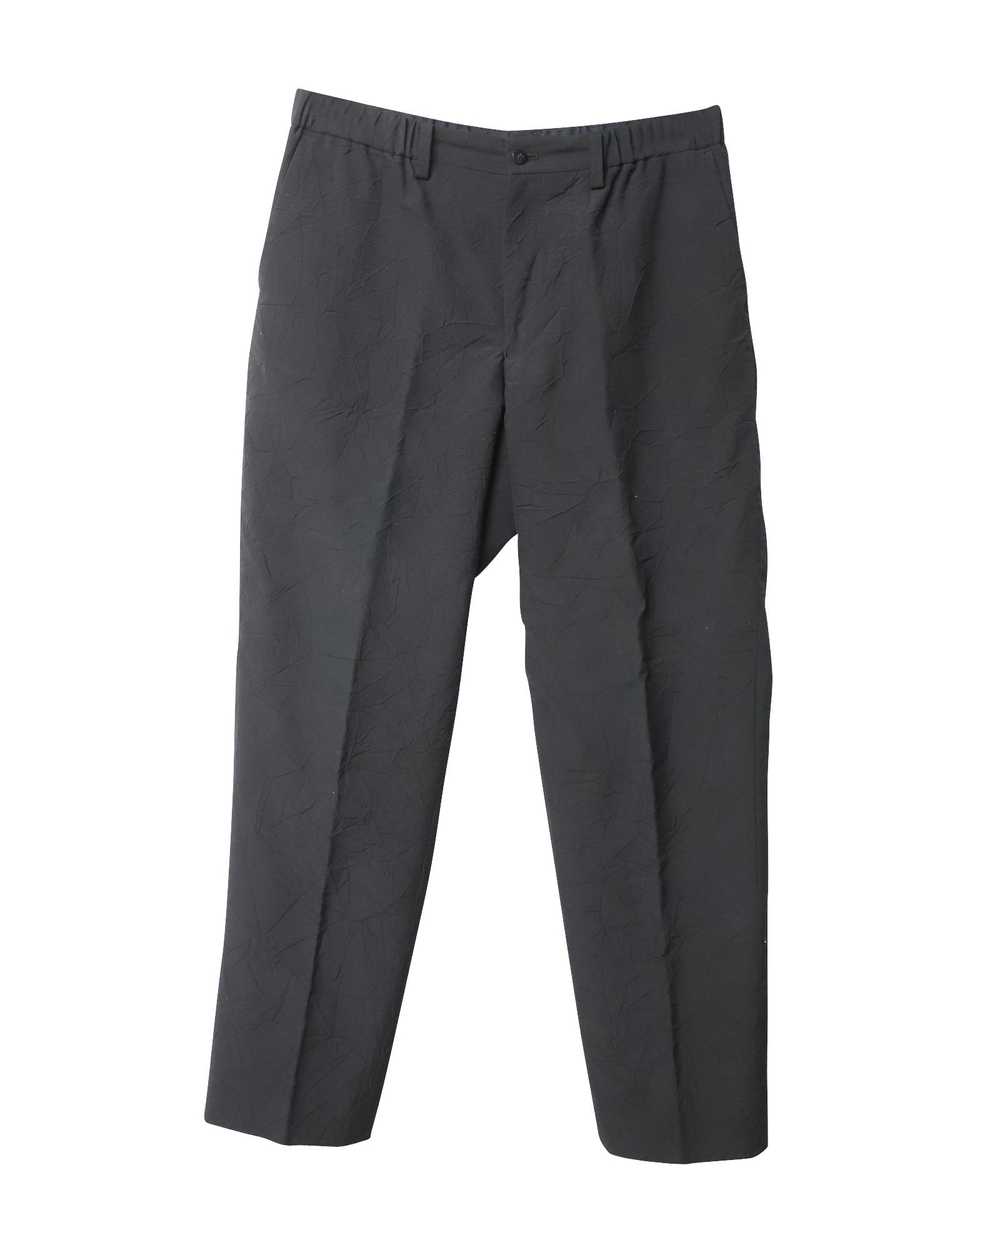 Product Details Black tailored trousers - image 2